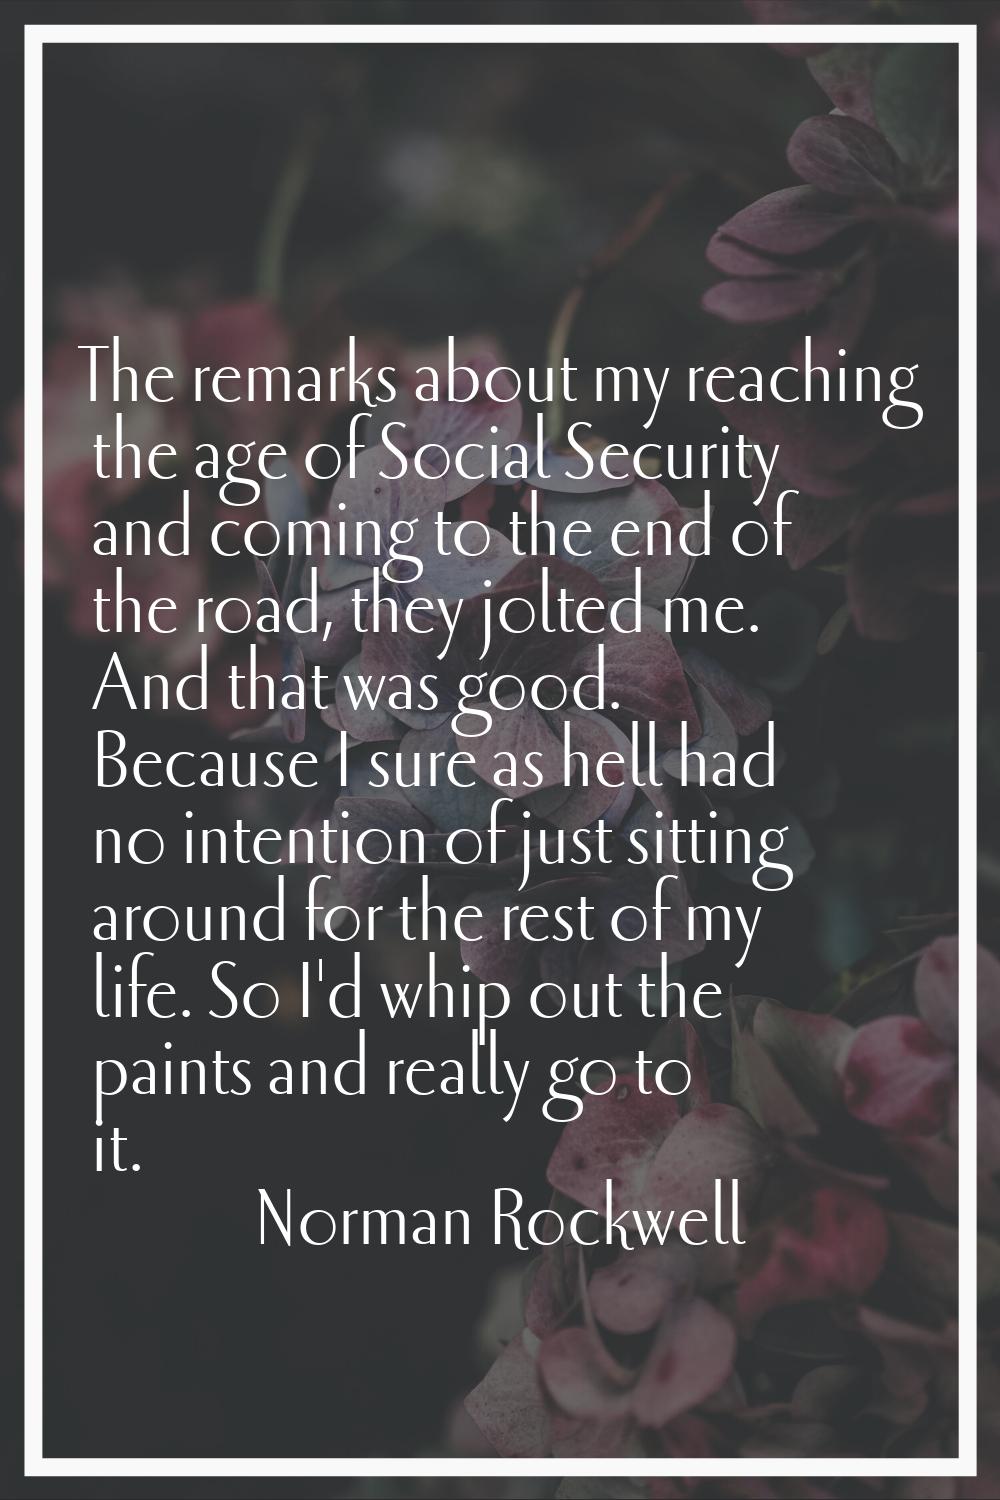 The remarks about my reaching the age of Social Security and coming to the end of the road, they jo